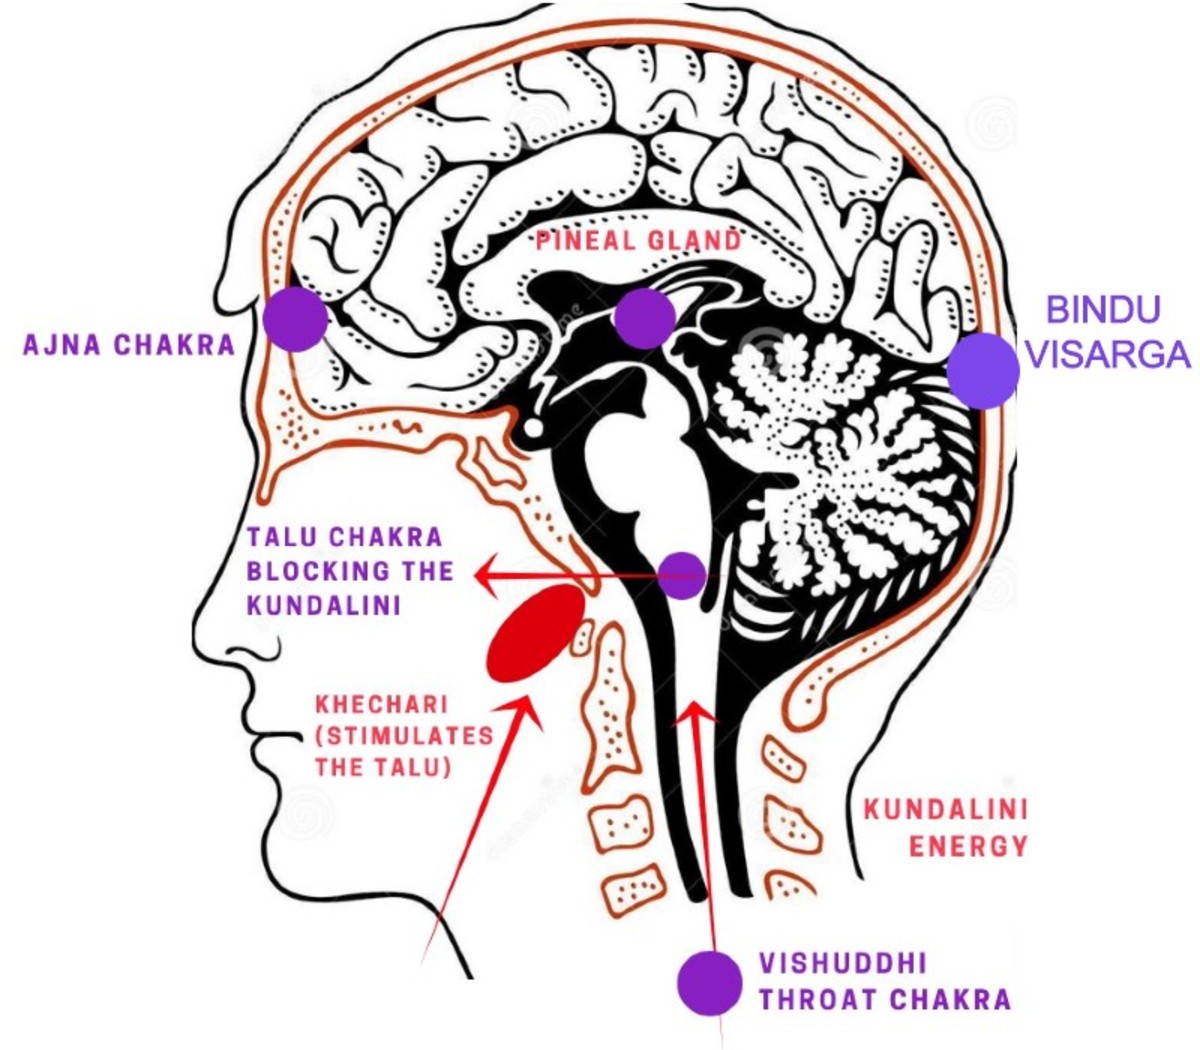 The CSF flows through the pituitary gland and becomes milky white substance. In the pineal gland it is a yellow (gold) substance, or the land of milk and honey. It became the Holy Claus or the Saint Claus bringing gifts from the North pole, aka the head. The head contains the cerebrum. The cerebrum is defined as cerebrum (n.) “the brain,” 1610s, from Latin cerebrum “the brain” (also “the understanding”), from PIE *keres-, from root *ker.